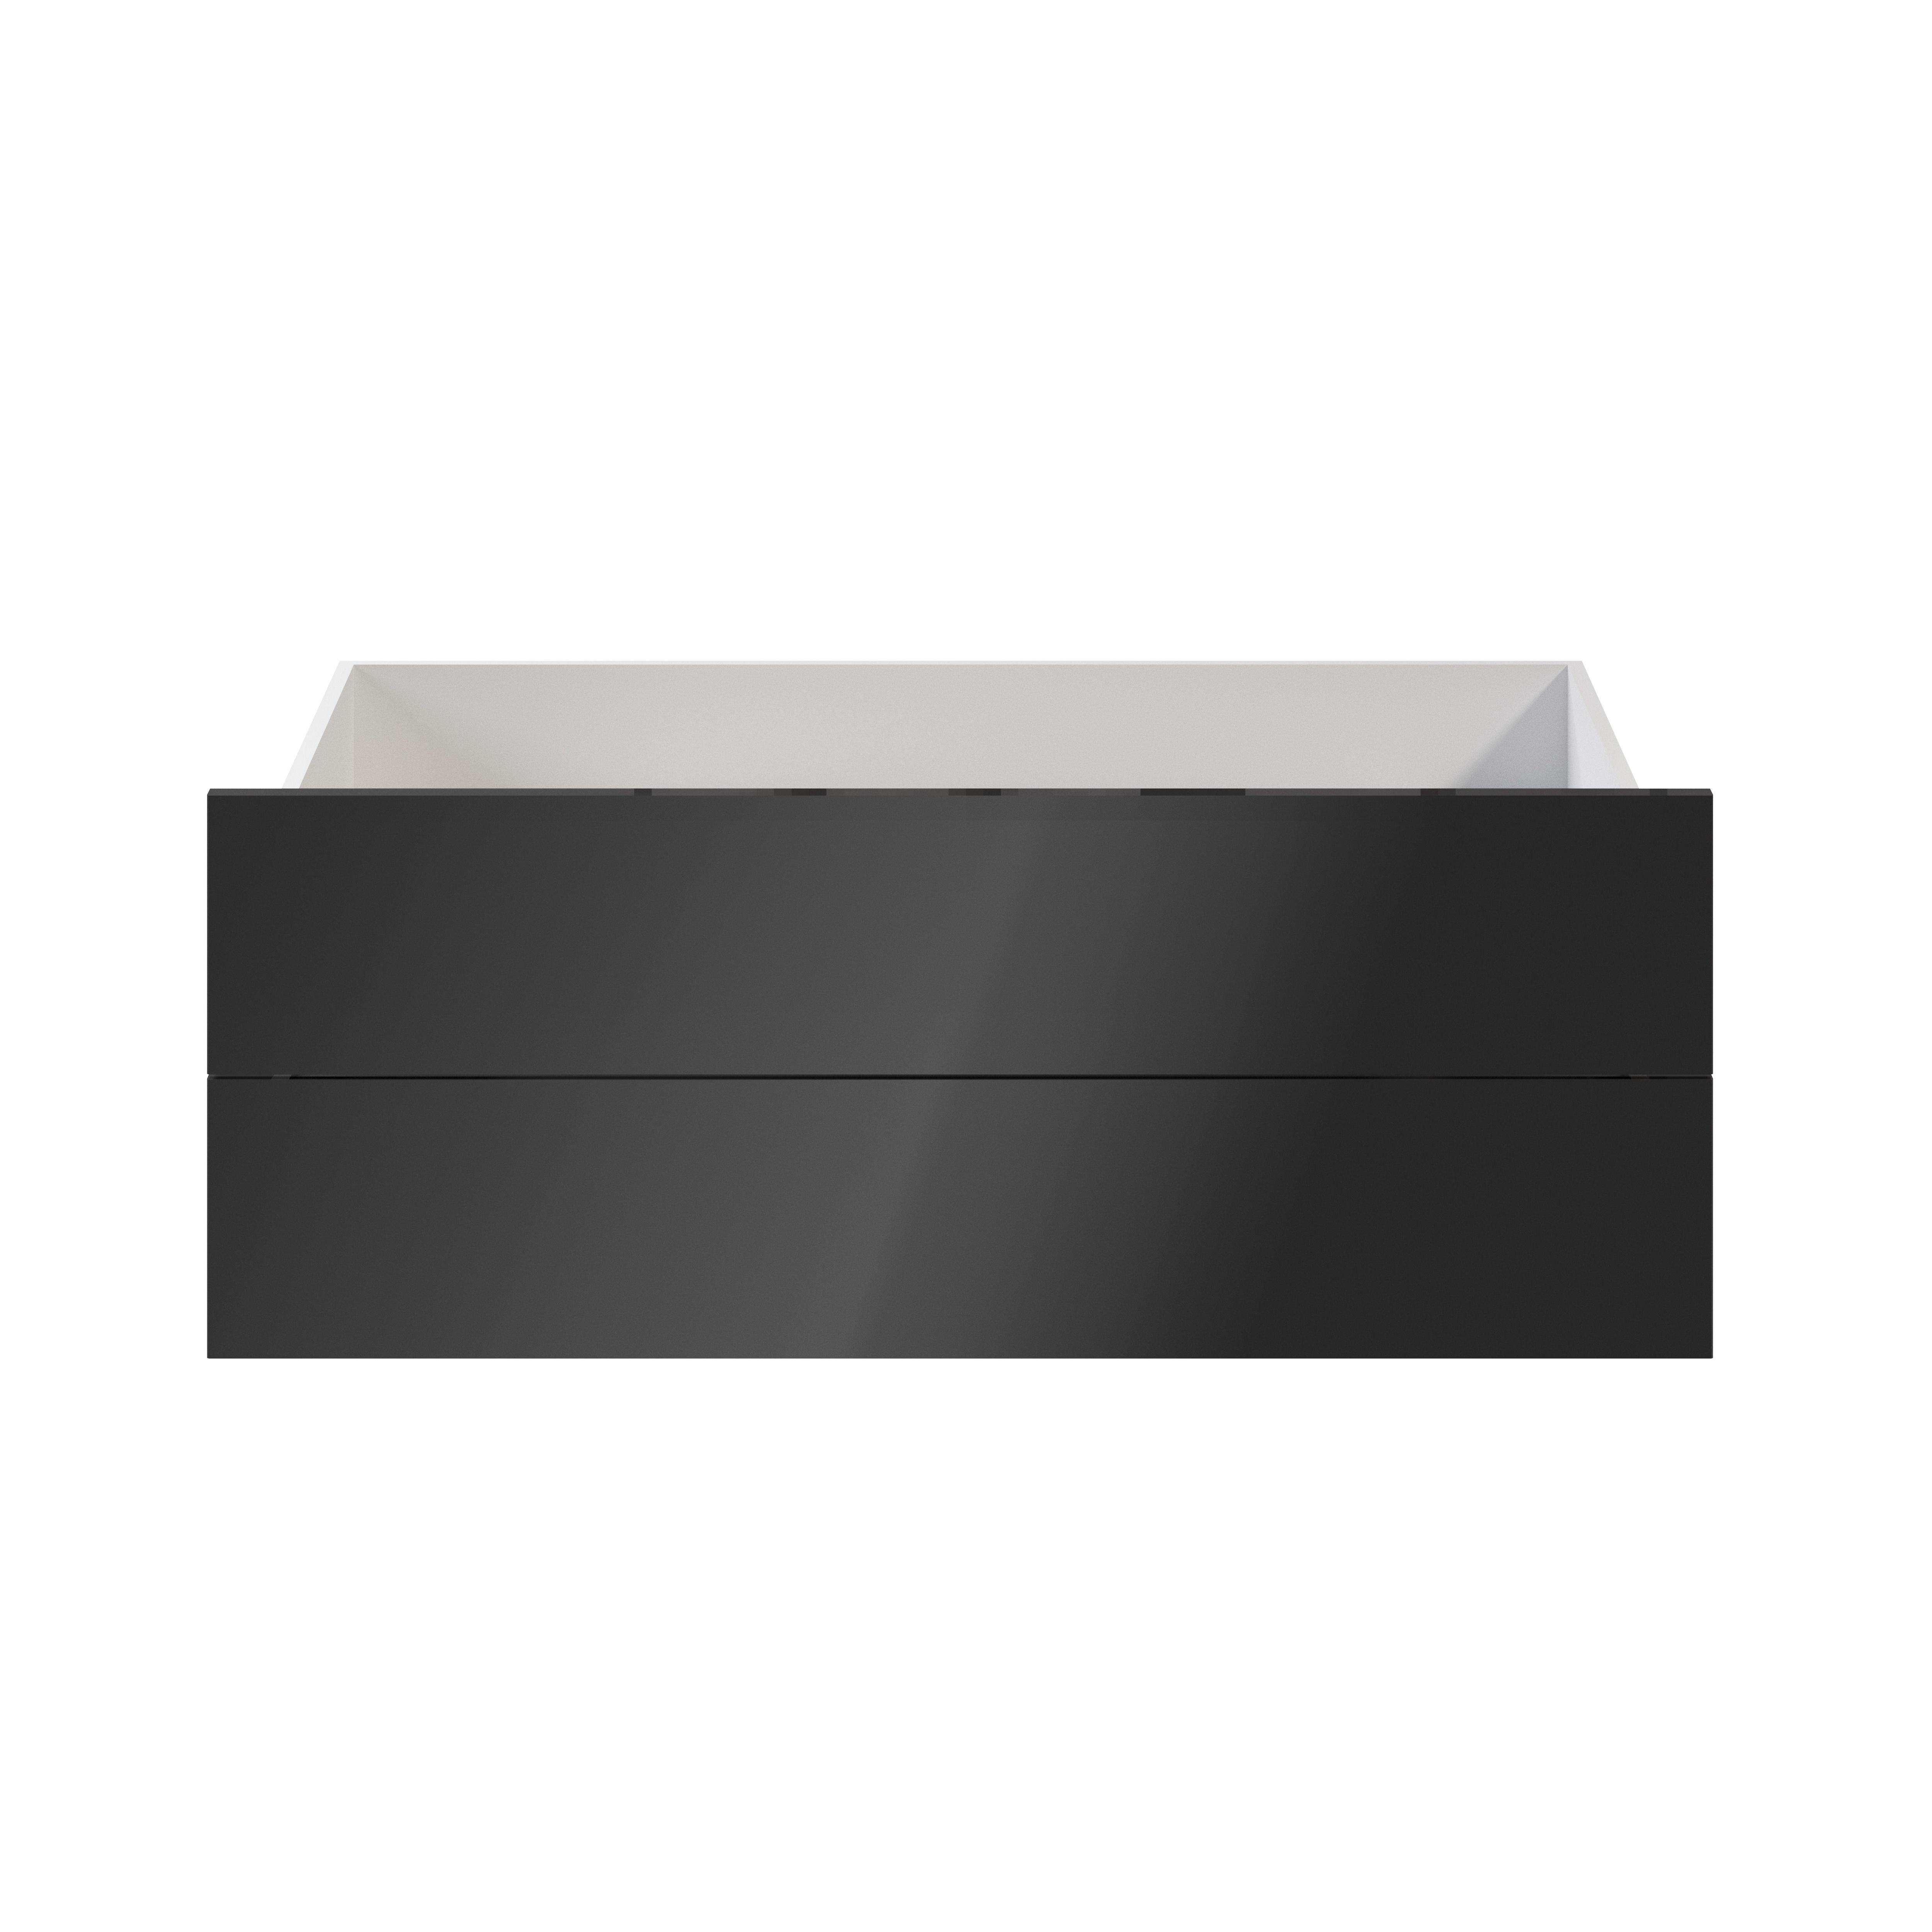 GoodHome Atomia Gloss anthracite Slab External Drawer (H)184.5mm (W)997mm (D)500mm, Set of 2